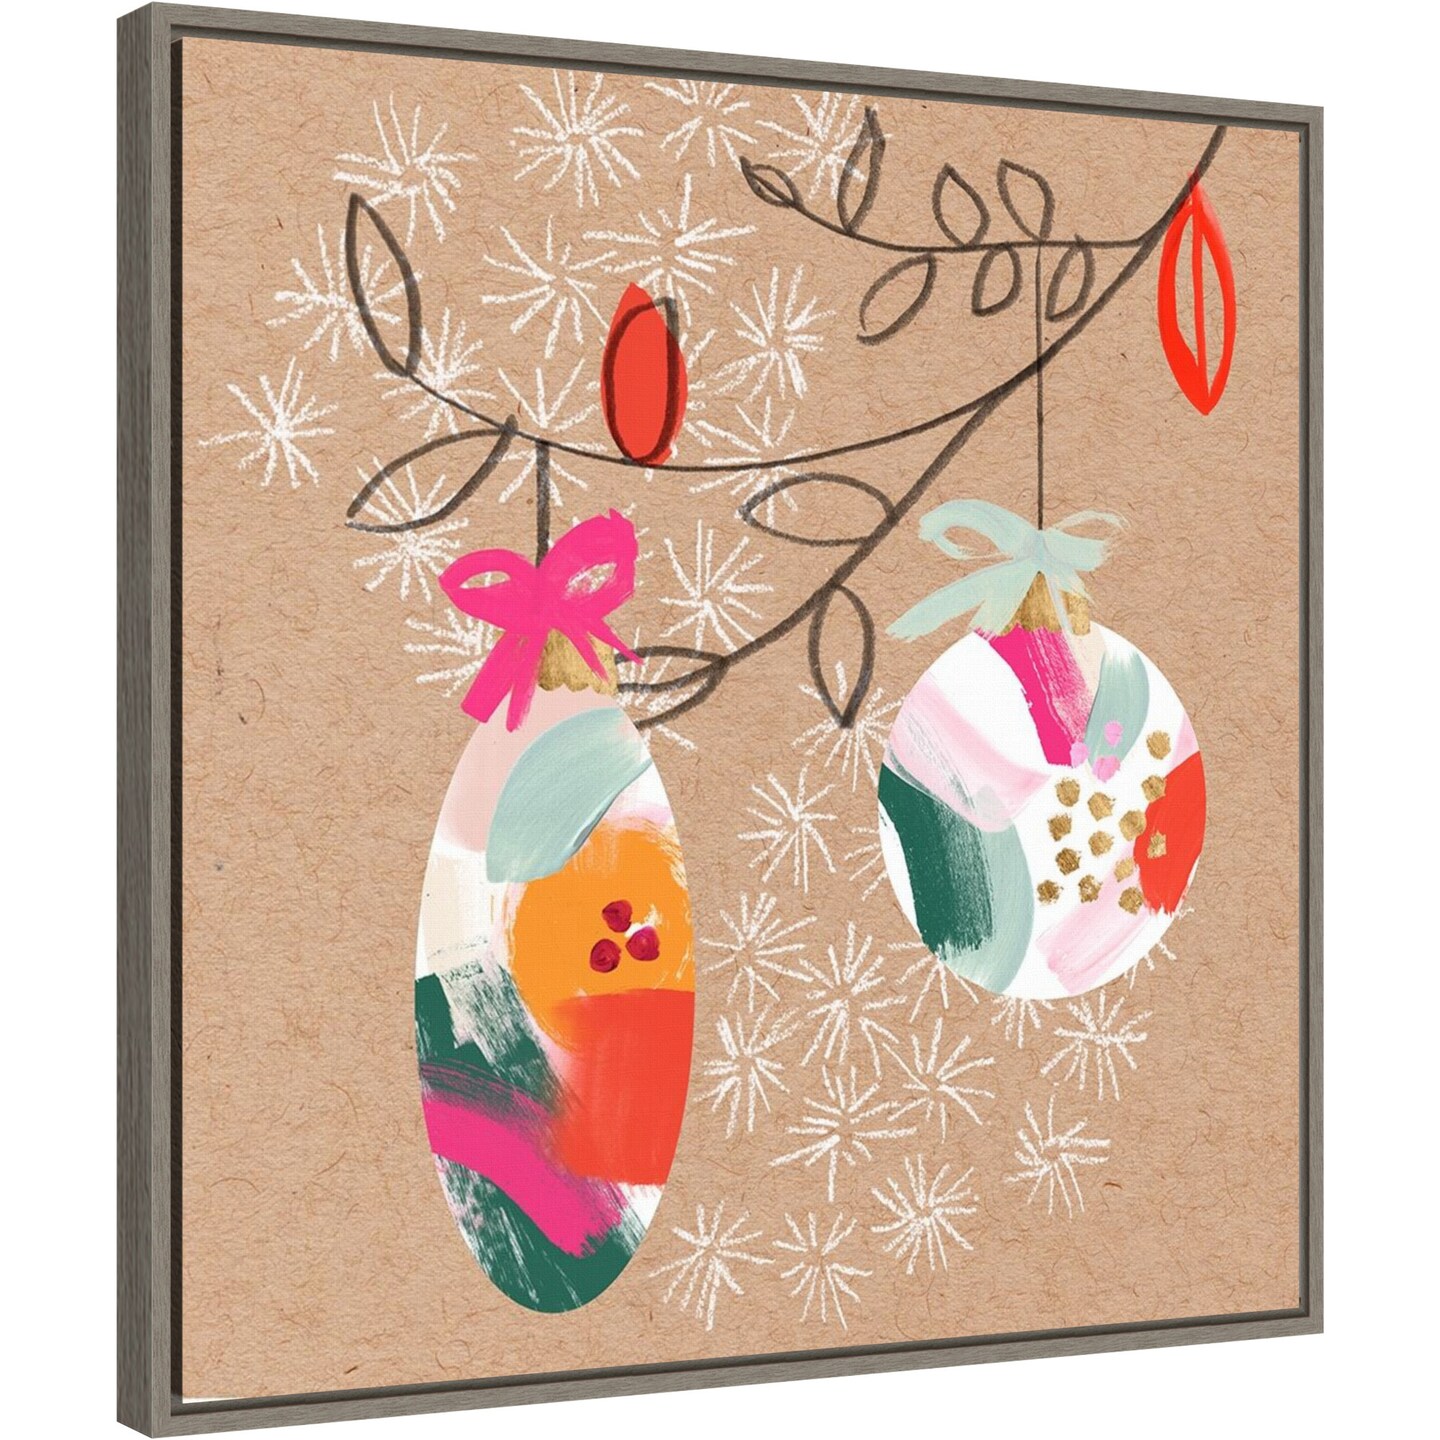 Crafty Christmas IV by Jennifer Paxton Parker 22-in. W x 22-in. H. Canvas Wall Art Print Framed in Grey